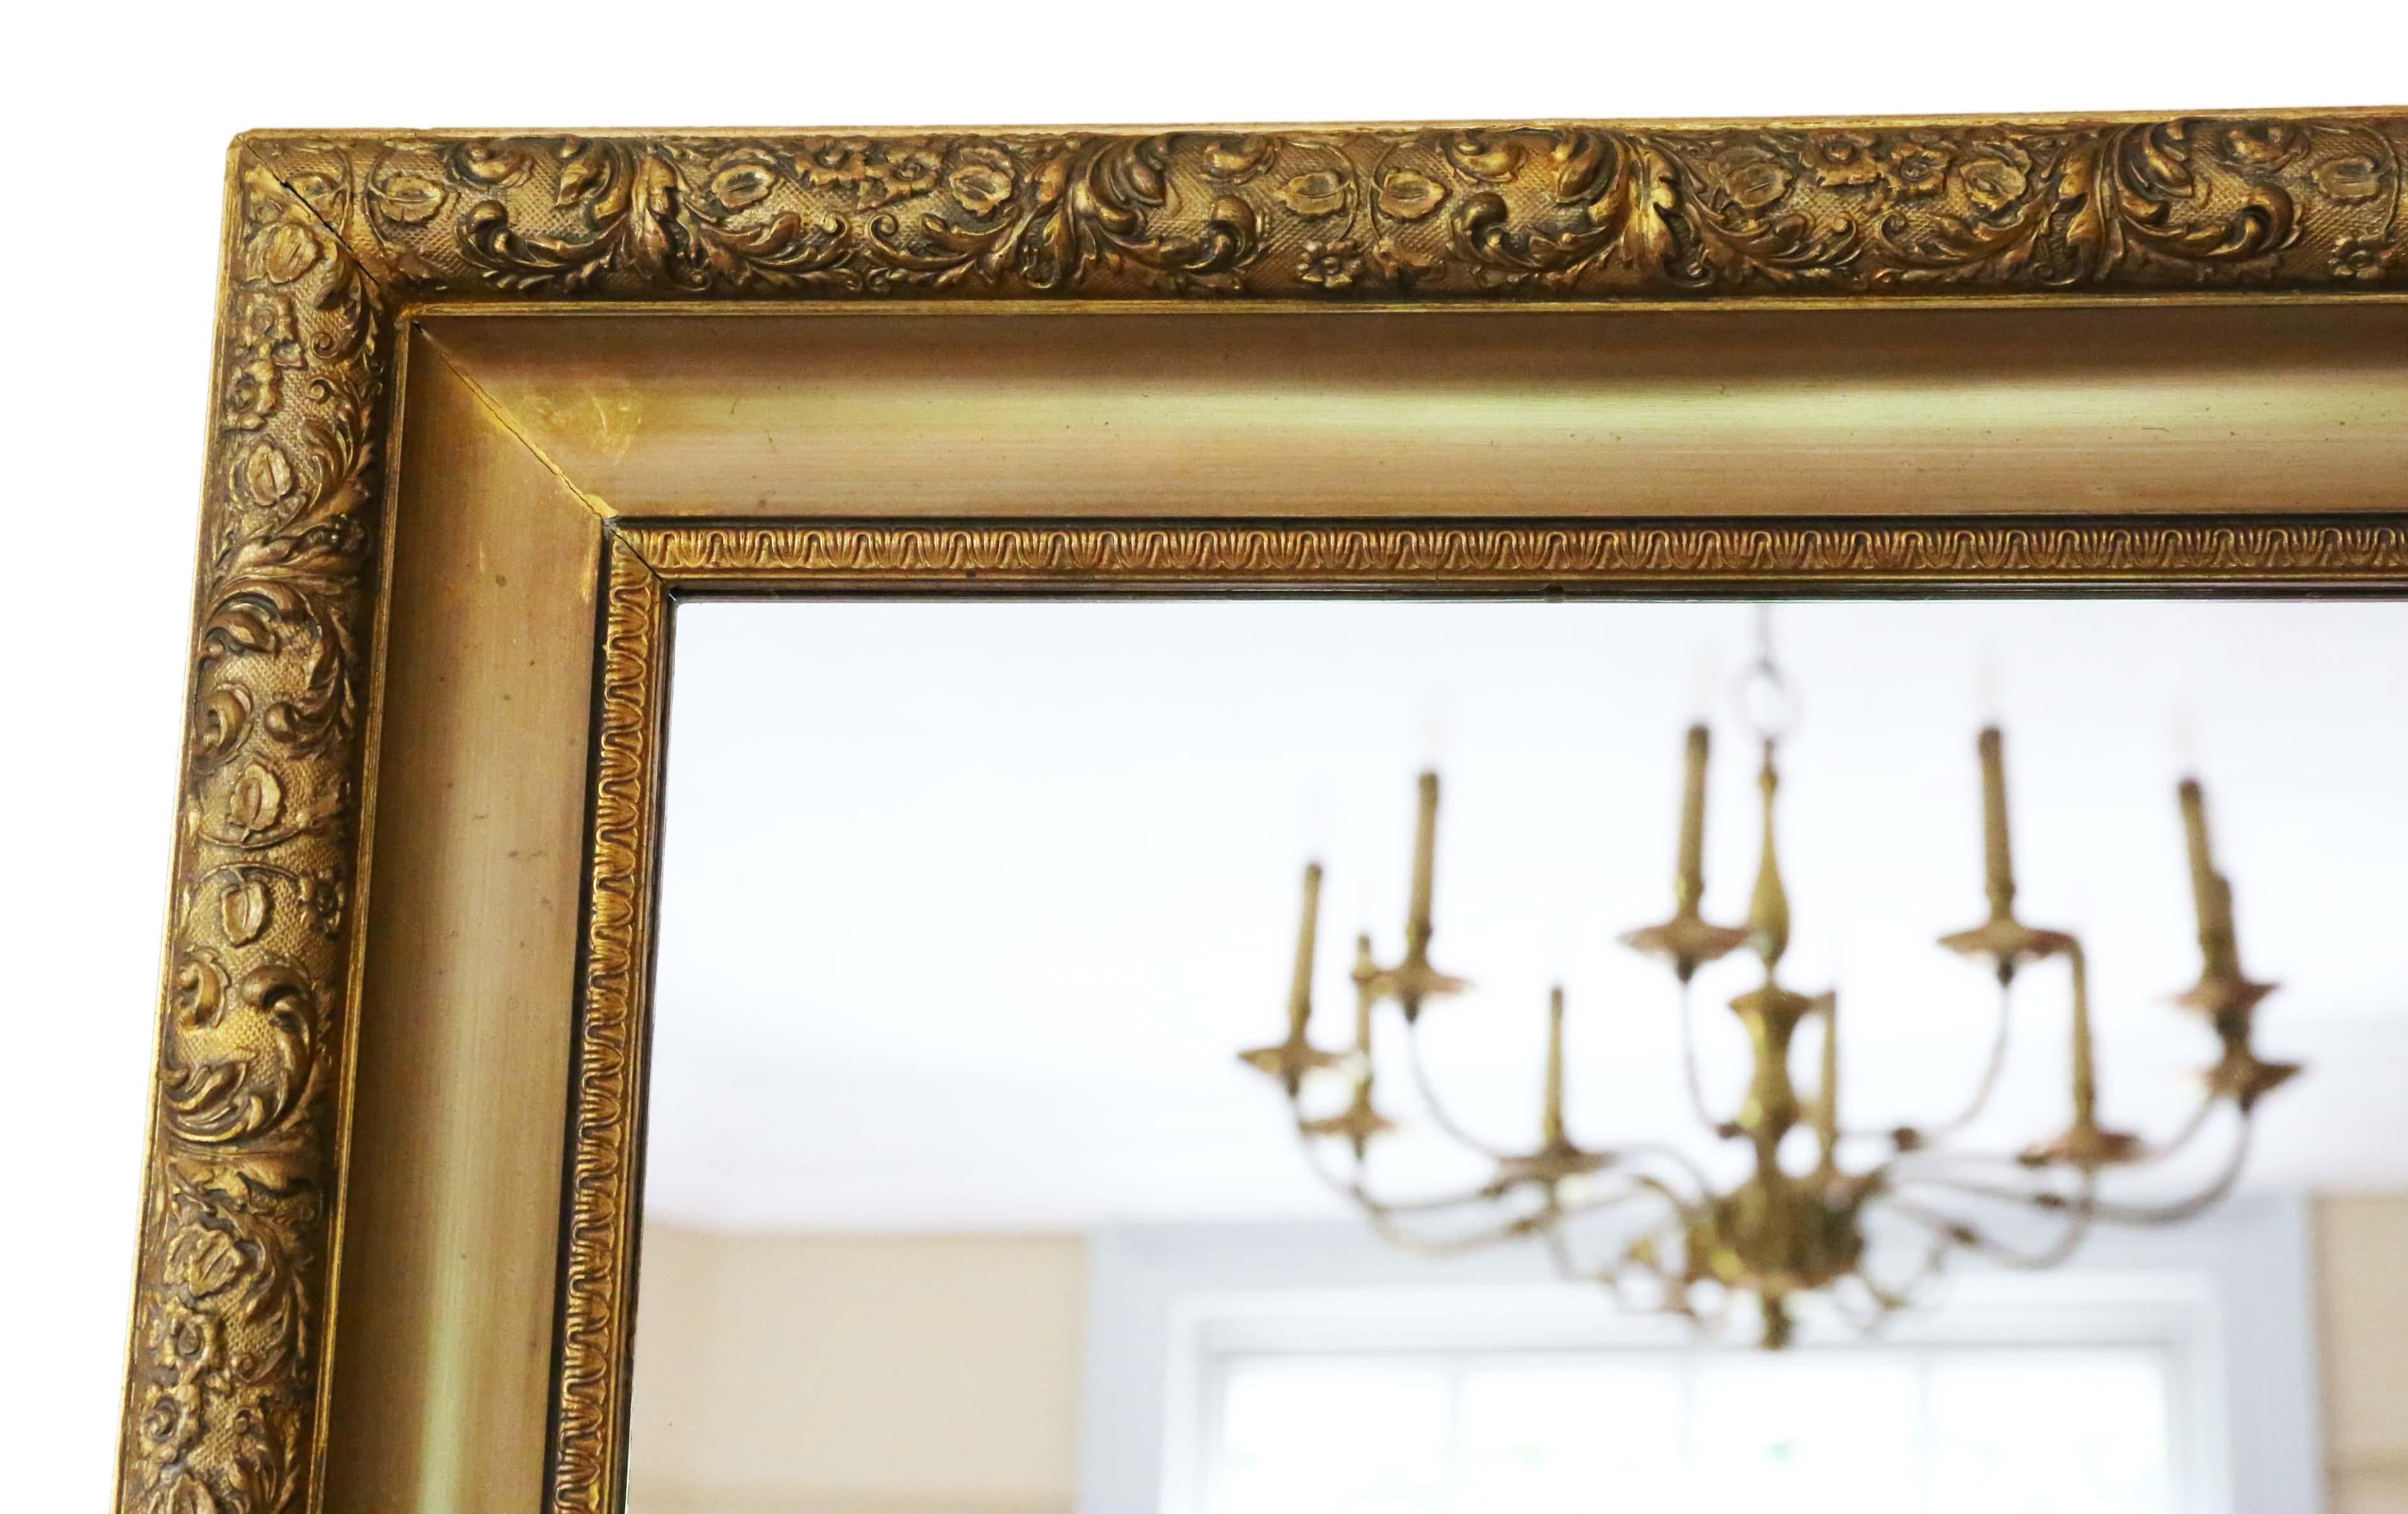 Antique fine quality gilt overmantle or wall mirror, circa 1900. Lovely charm and elegance. Original finish.
Great frame in very good condition… looks great.
An impressive and rare find, that would look amazing in the right location. No